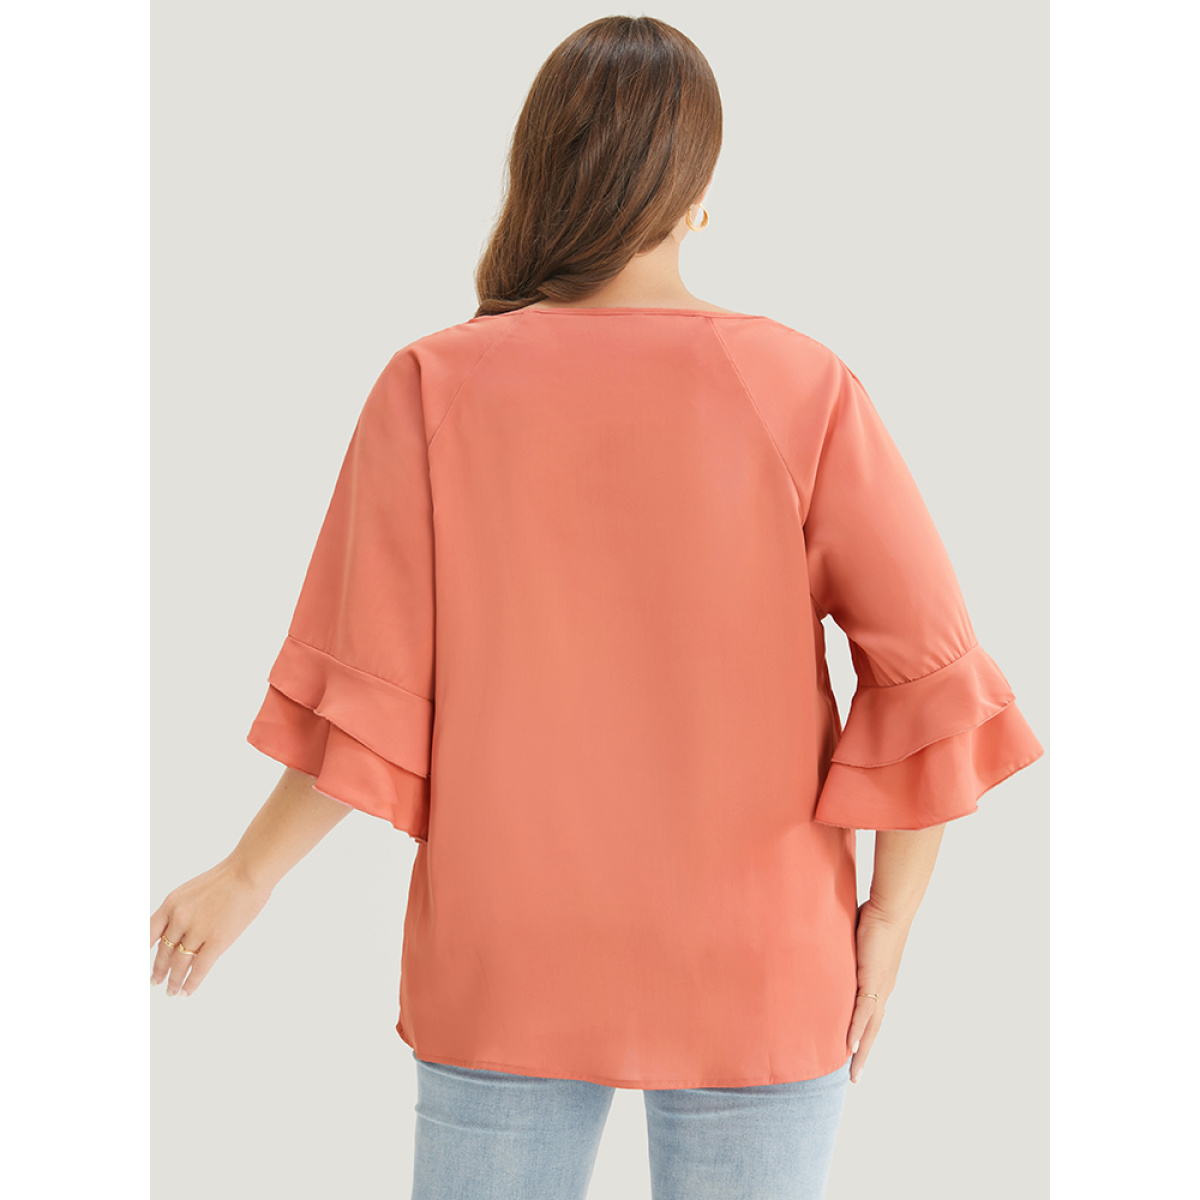 

Plus Size OrangeRed Plain Ruffle Tiered Round Neck Blouse Women Work From Home Elbow-length sleeve Round Neck Work Blouses BloomChic